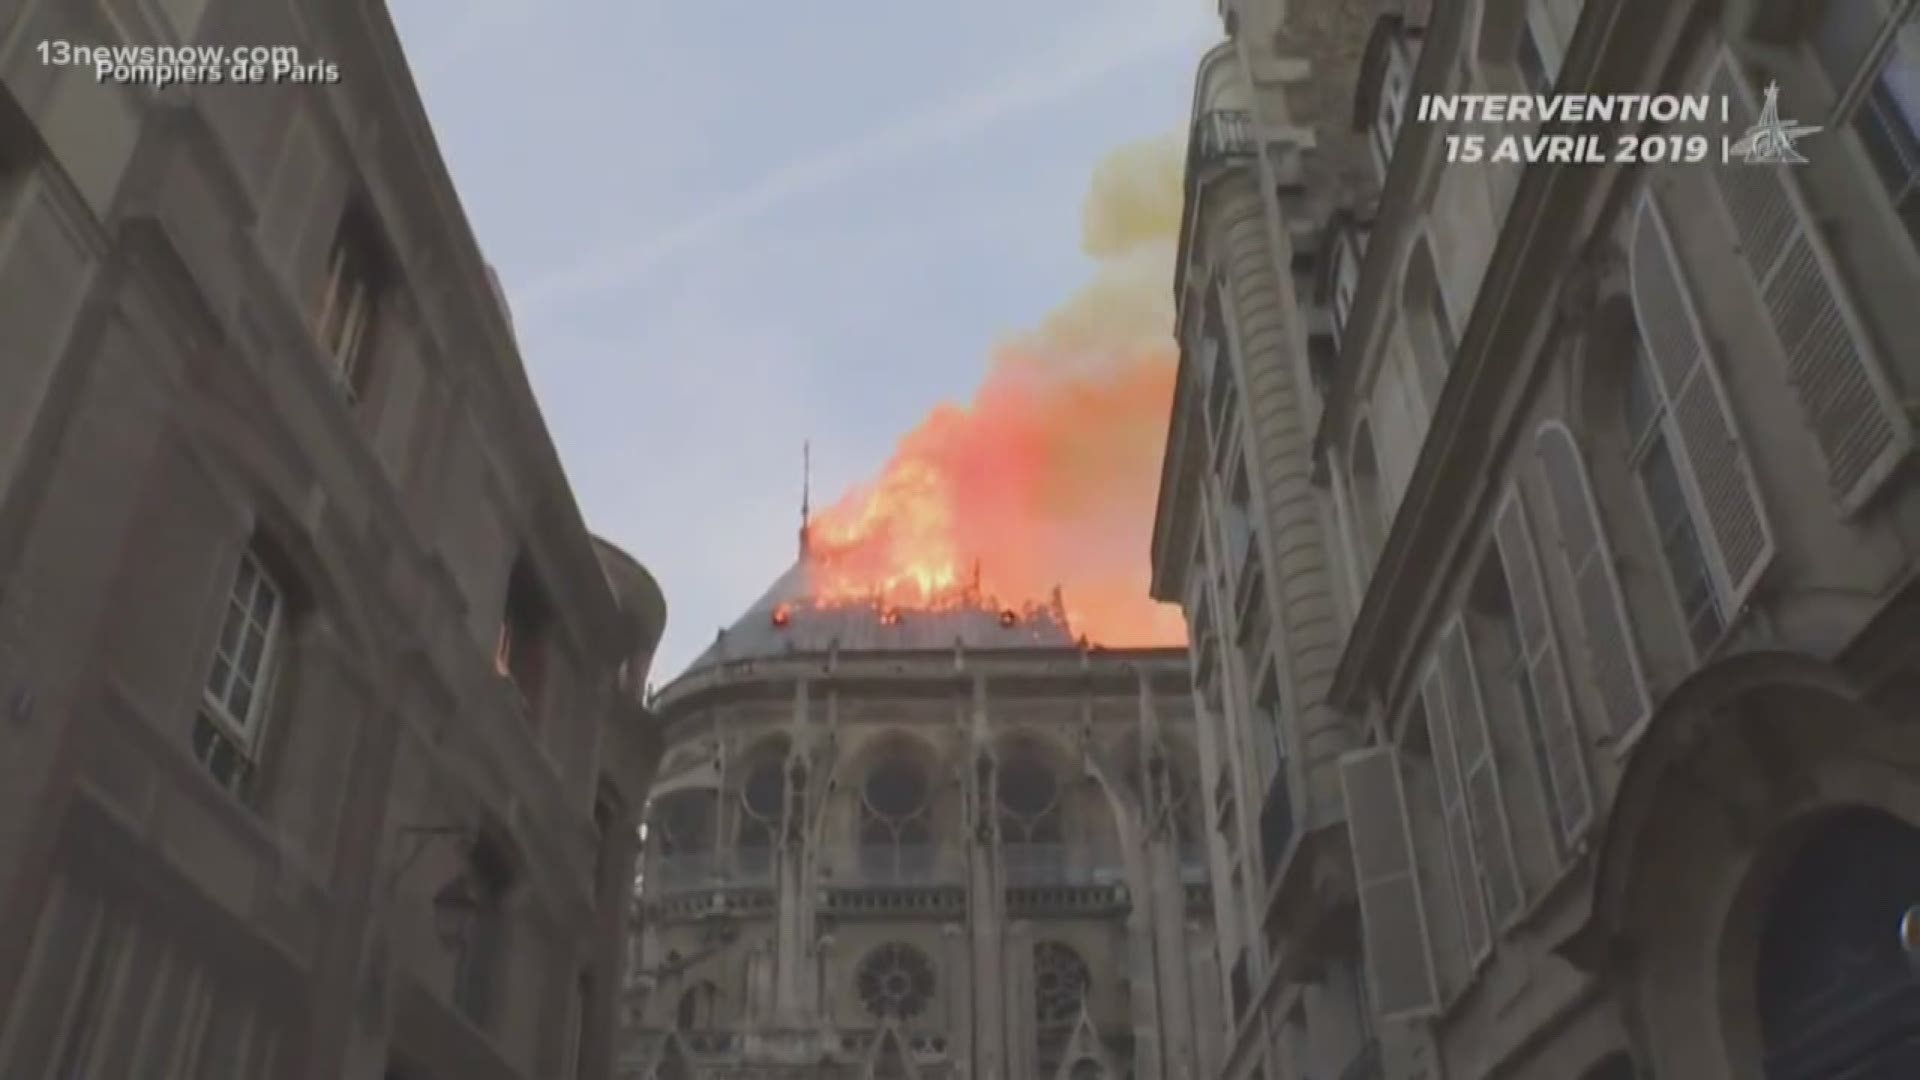 Karl Werne was in Paris among those who watched in disbelief as the historic cathedral burned.